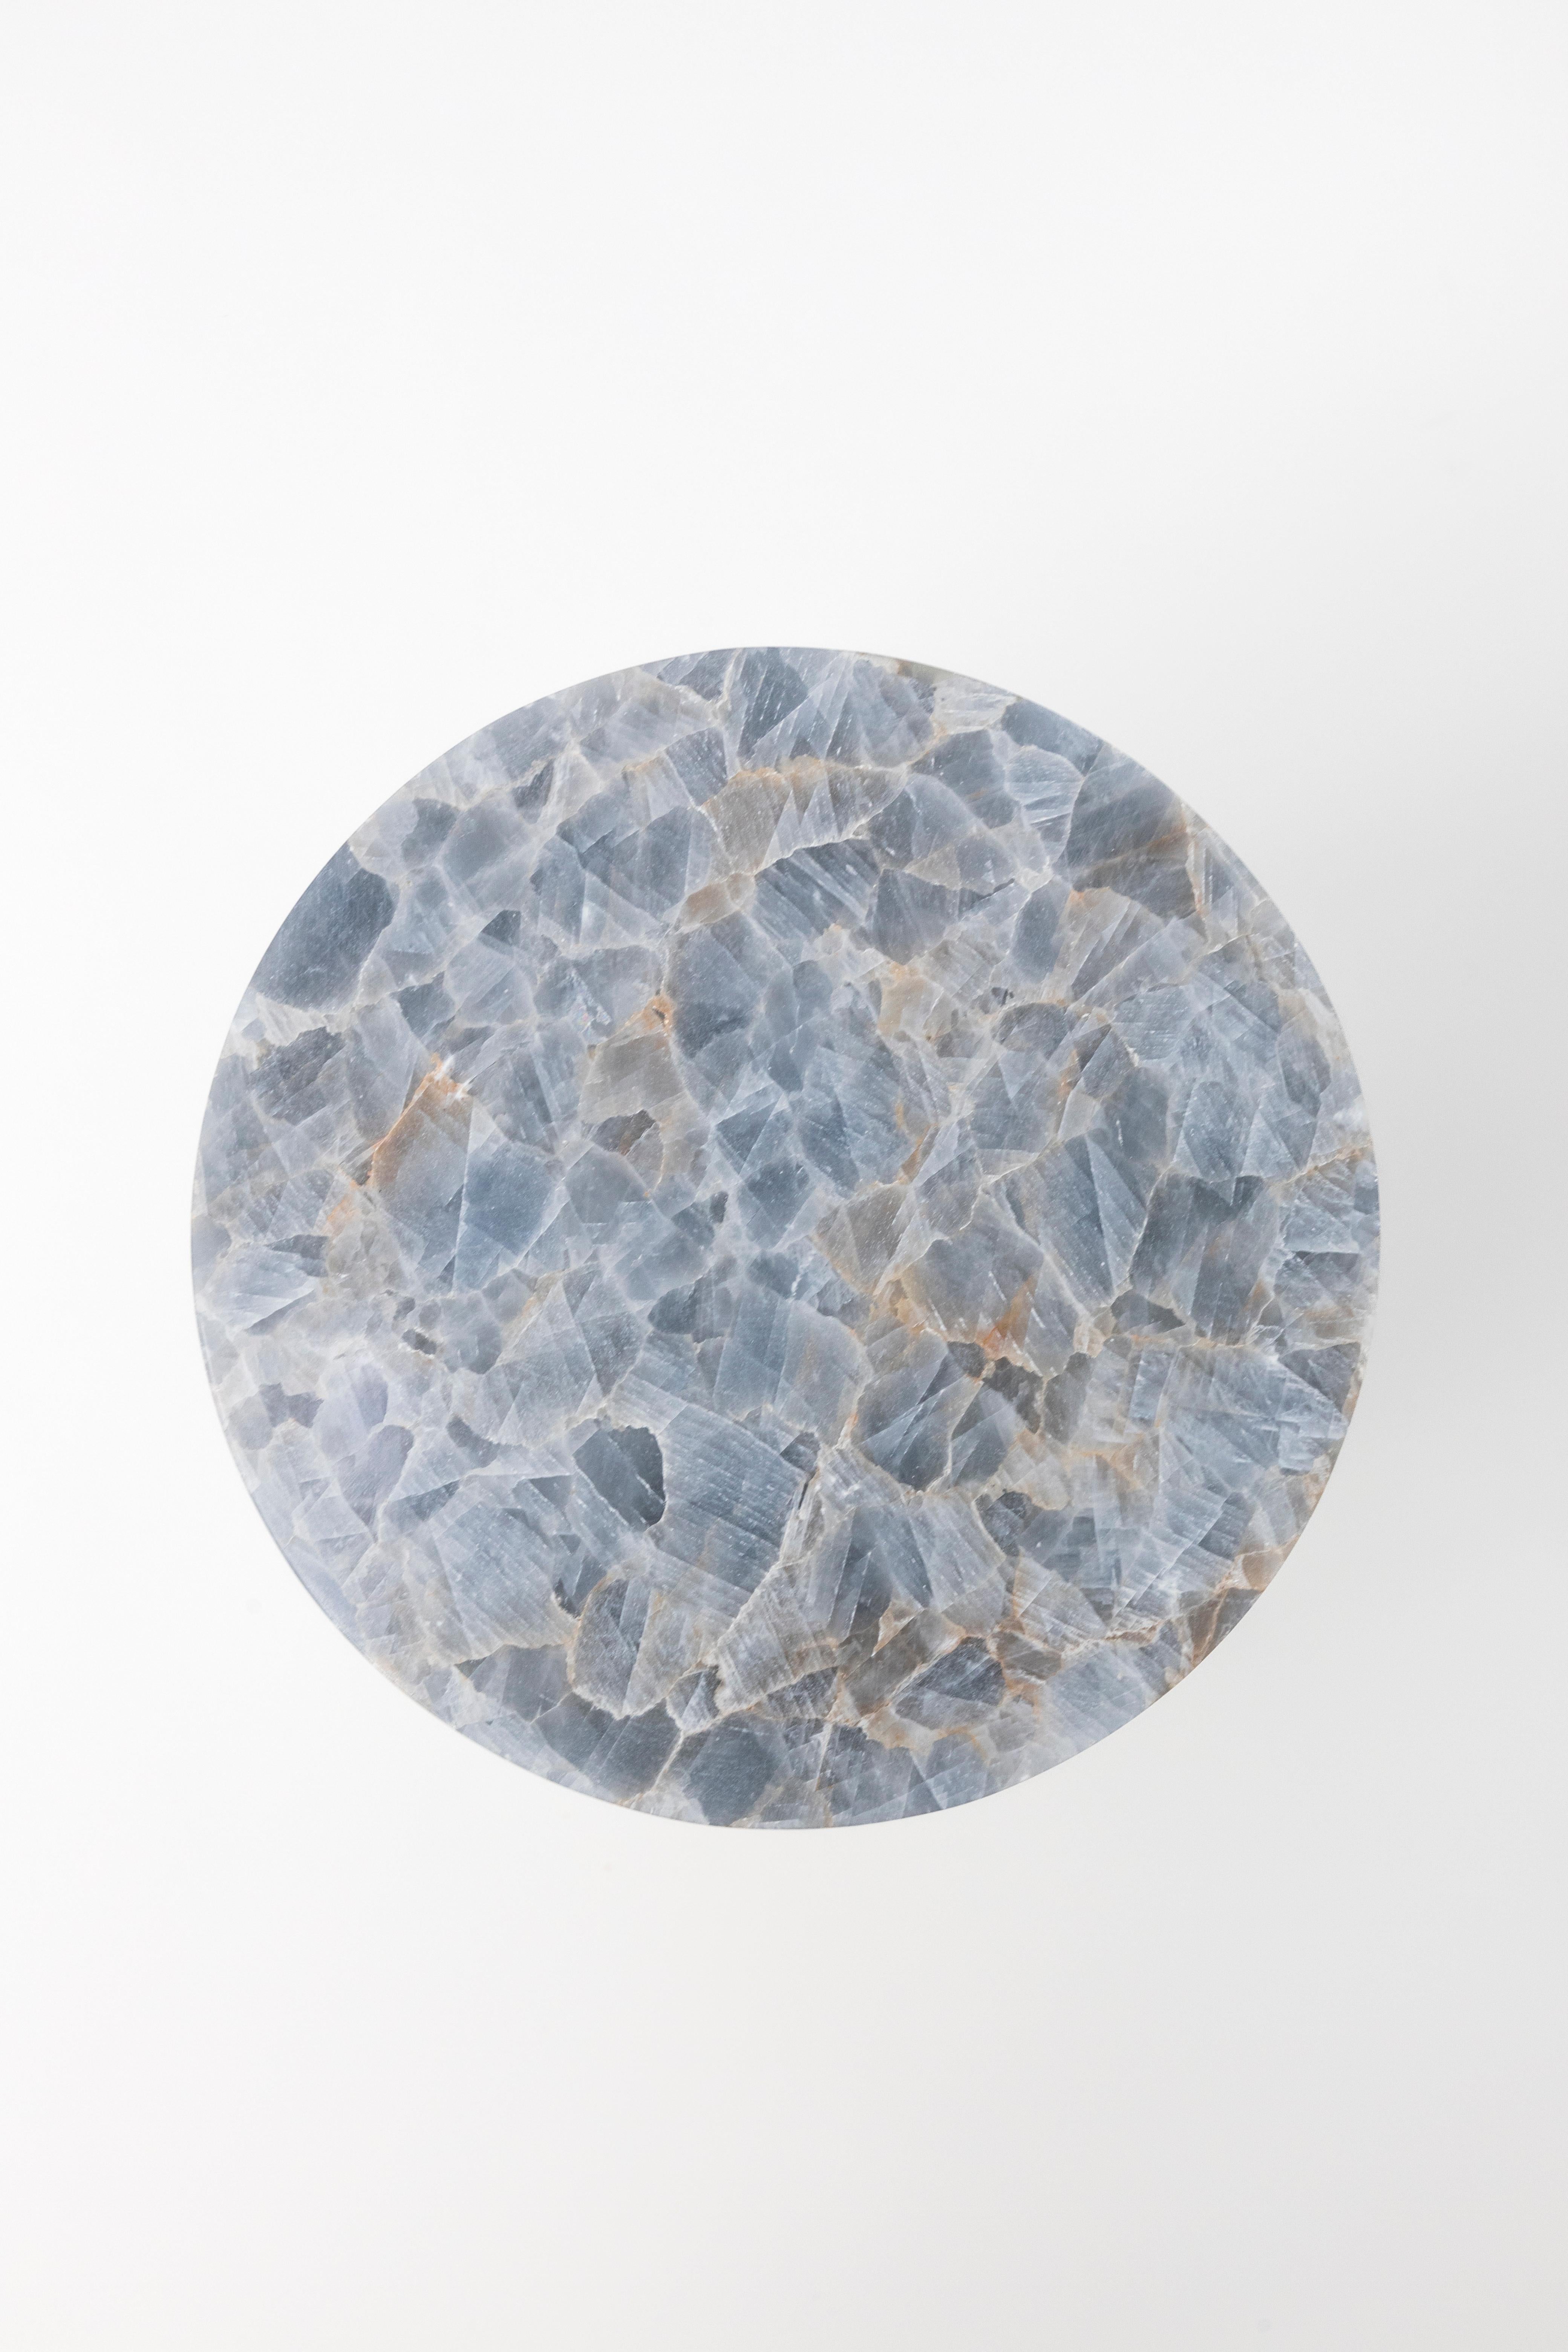 Hand-Crafted Volcanic Shades of Marble V - Sten Studio - Golden calacatta and blue calcite For Sale